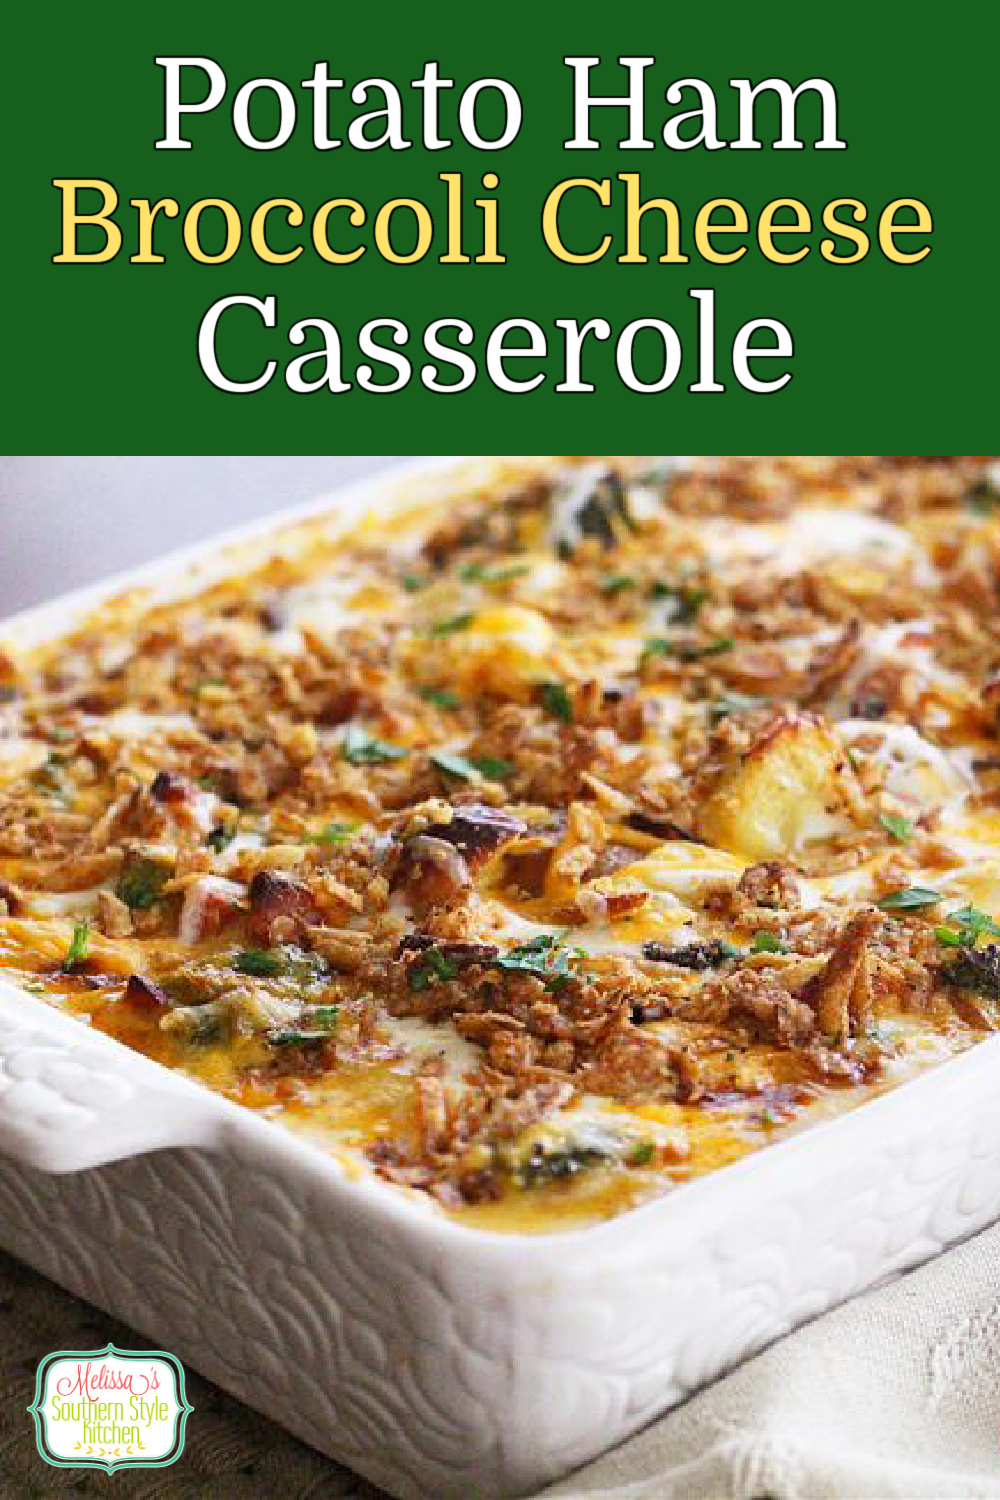 This cheesy Potato Ham and Broccoli Cheese Casserole is a one dish meal ideal for any day of the week #broccolicheese #broccolicheddarcasserole #potatocasserole #leftoverhamrecipes #casseroles #food #southernrecipes #southernfood #melissassouthernstylekitchenh #potatorecipes #dinner #dinnerideas #bestcasserolerecipes